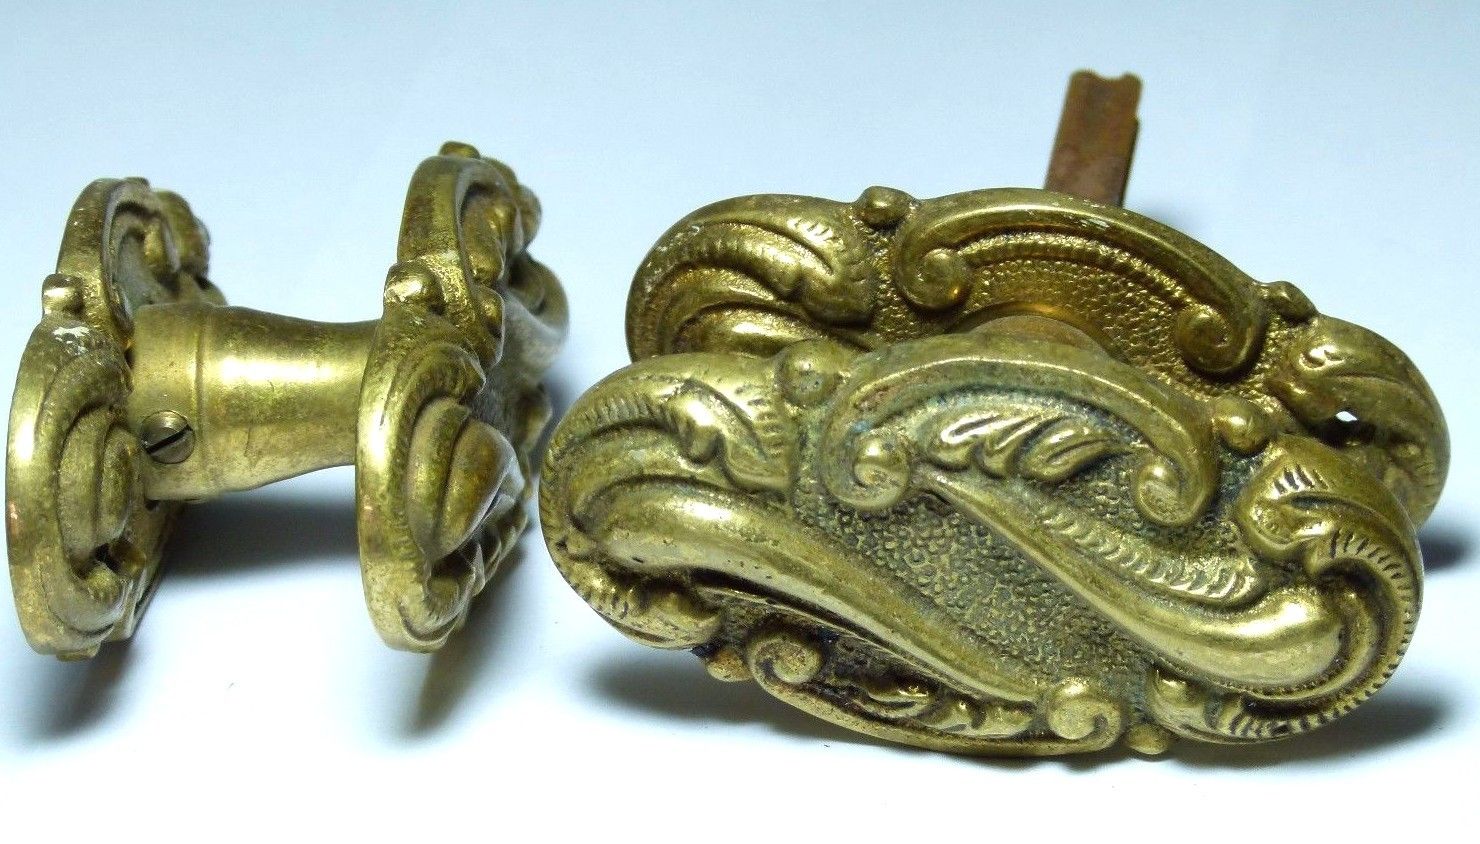 PAIR VINTAGE BRASS DOOR HANDLES KNOBS ROCOCO DESIGN WITH MATCHING BACKPLATES